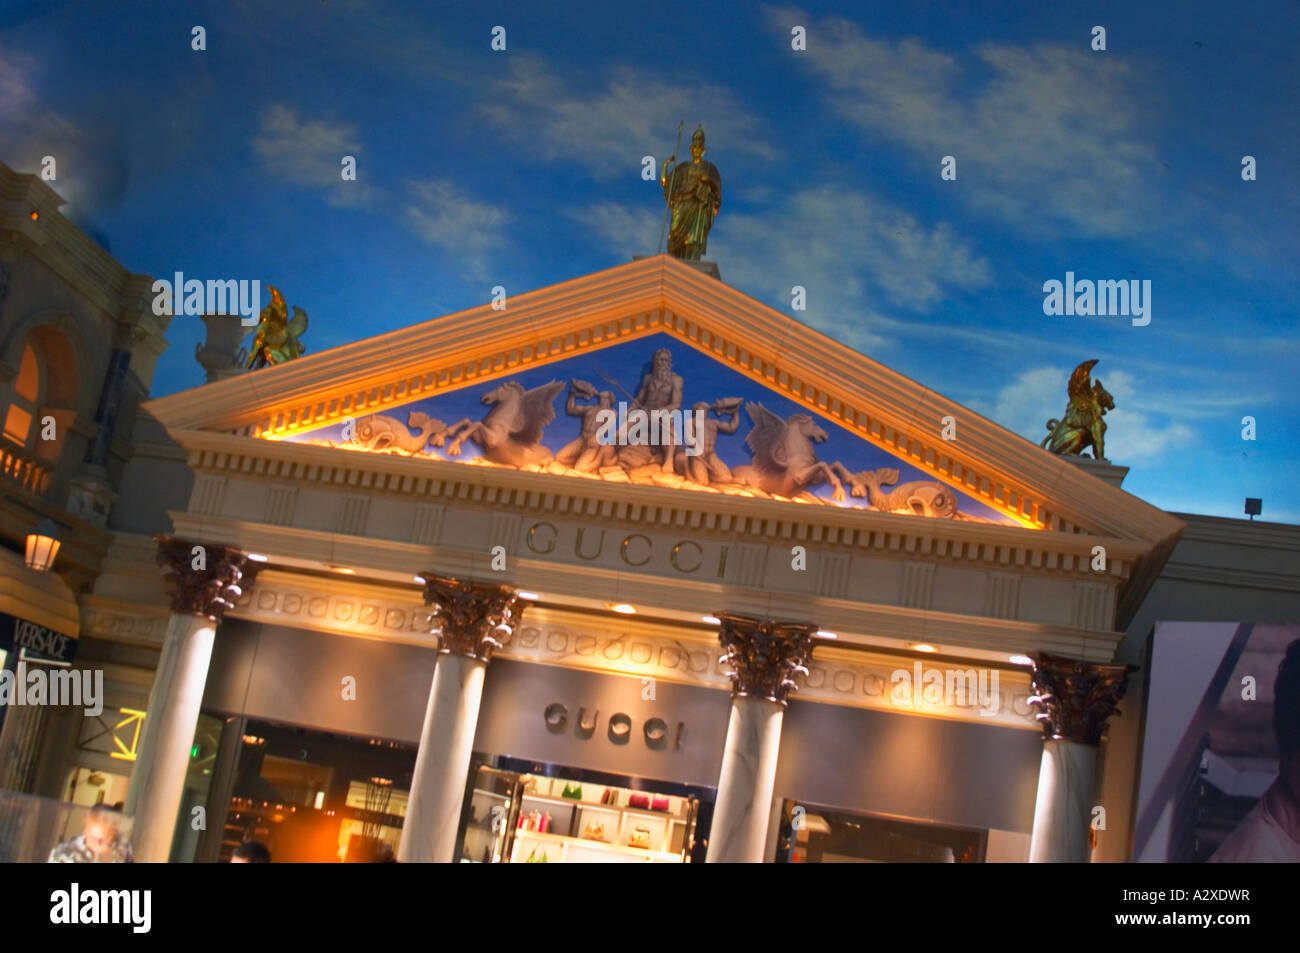 LAS VEGAS - APRIL 13 : Exterior Of A Gucci Store In Caesars Palace